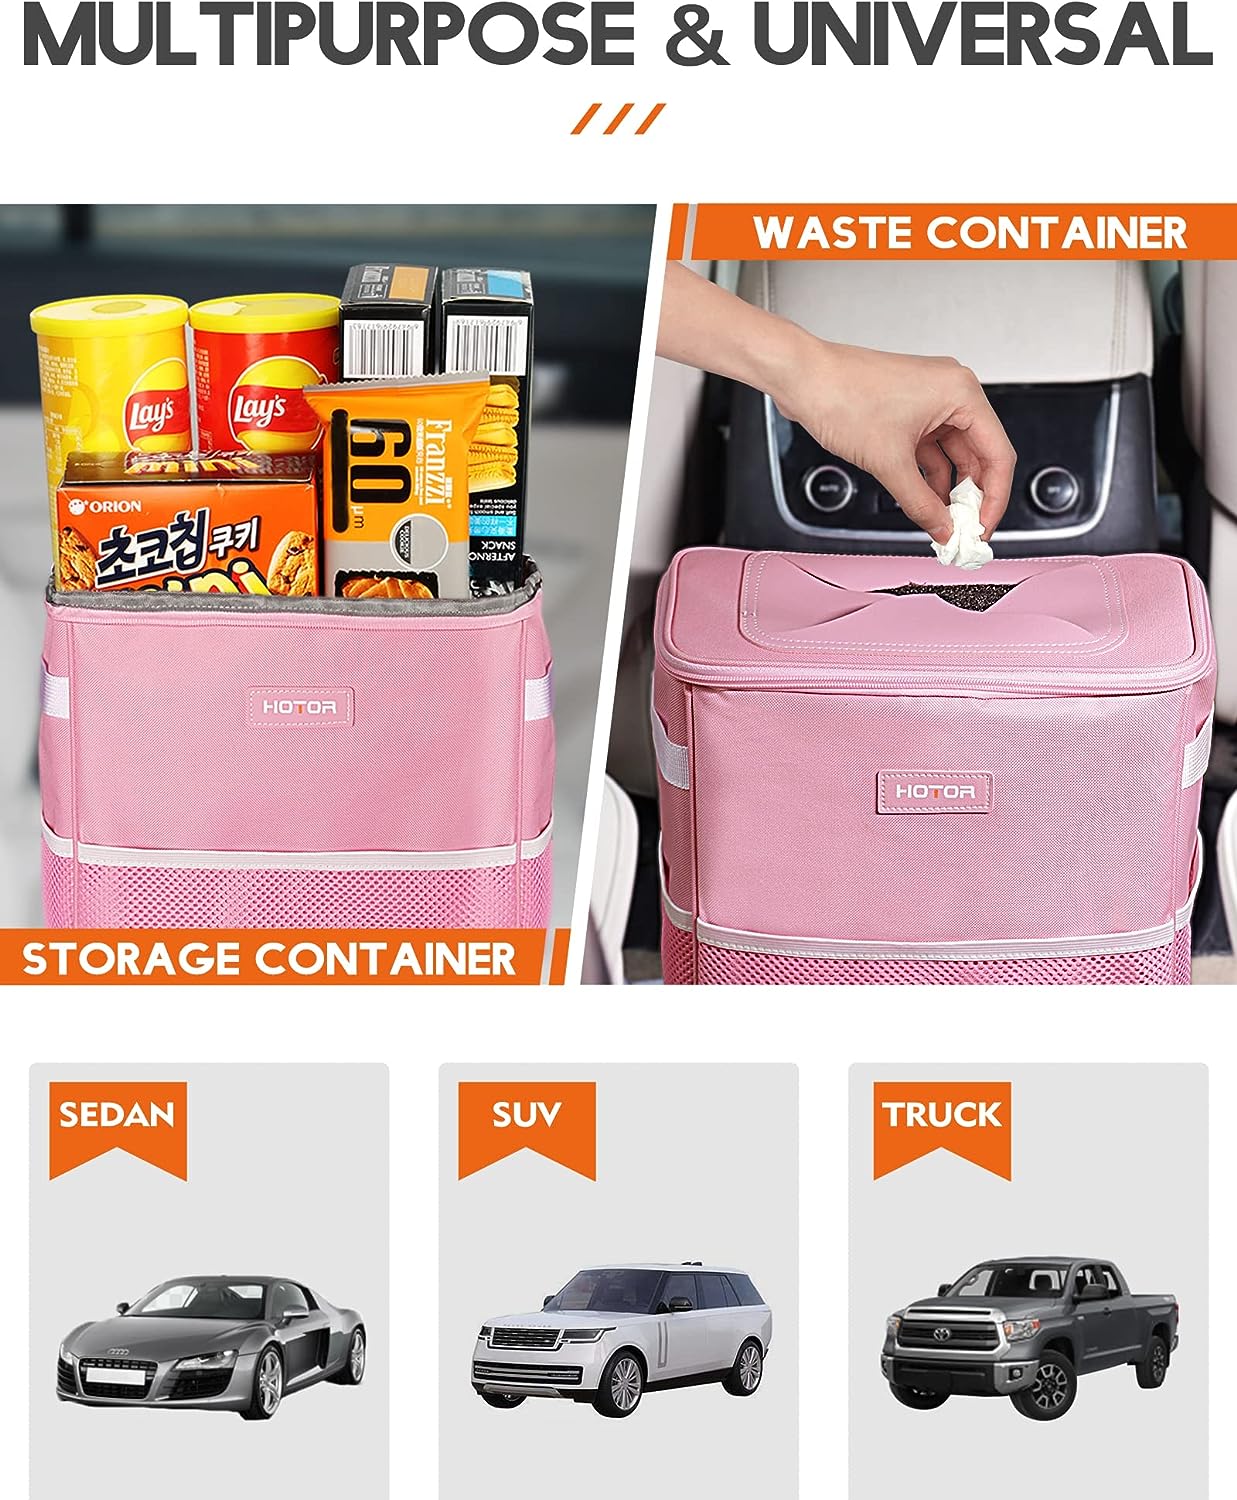 HOTOR Car Trash Can, 3-Gallon Ultra-Large Car Garbage Can, 100% Leakproof & Waterproof Trash Can for Car, Multipurpose Car Trash Bin with Adjustable Straps, Magnetic Buckles, Mesh Pockets (Pink)